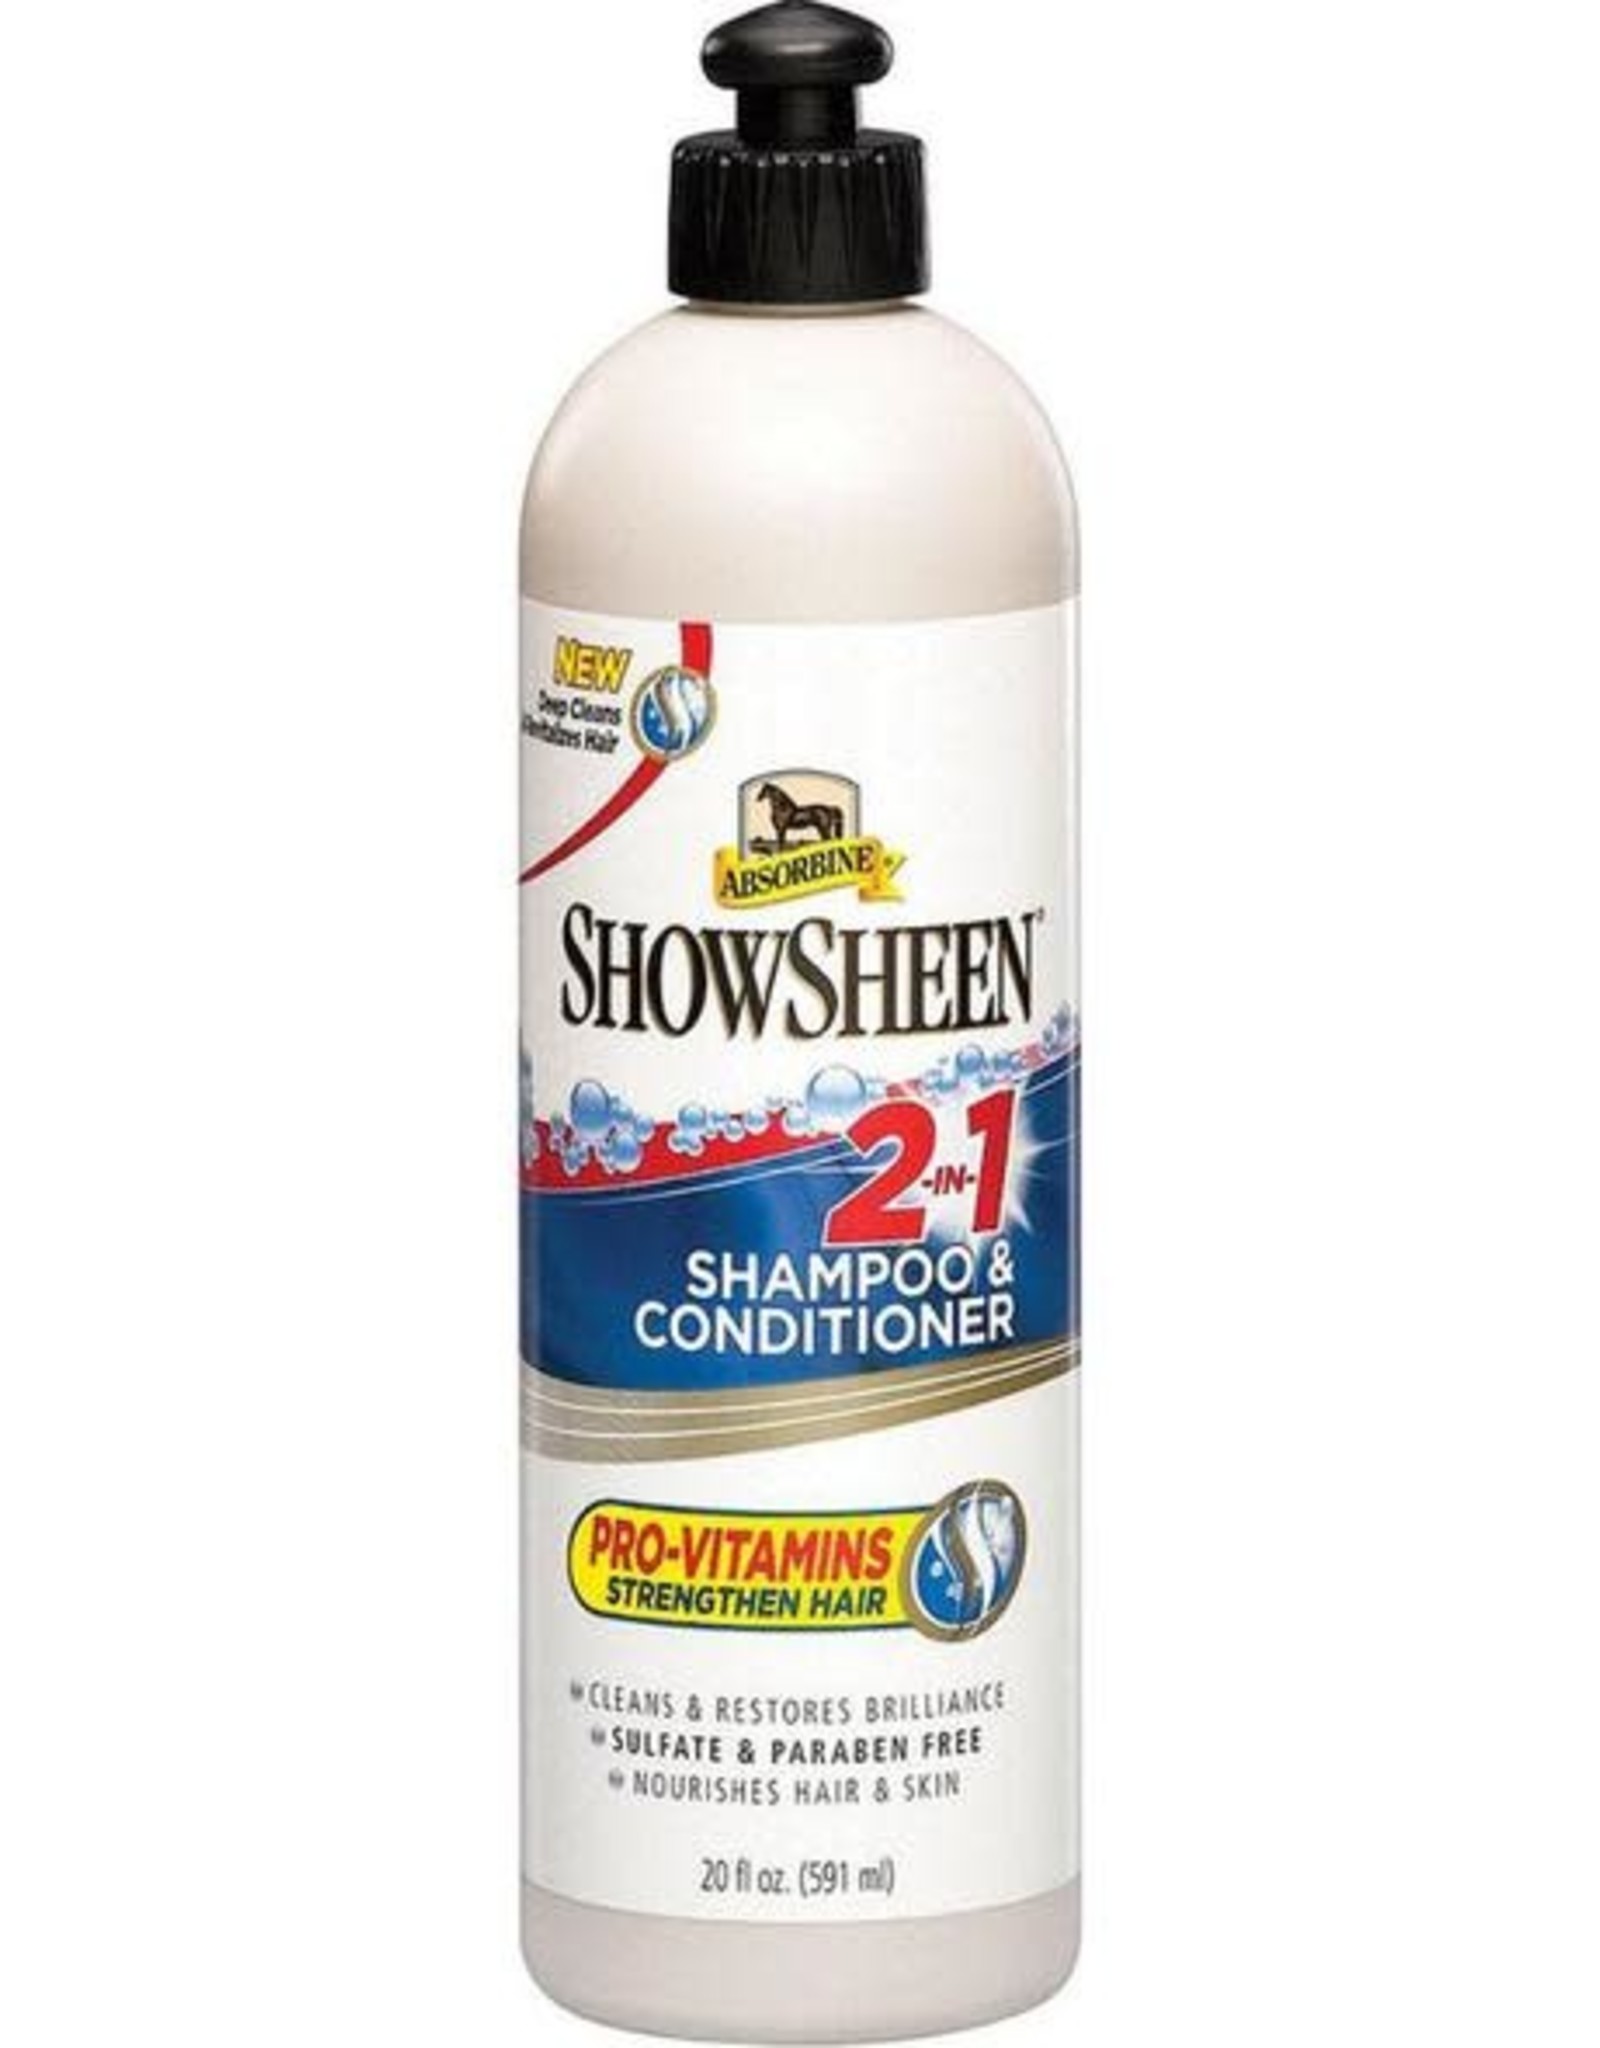 SHOWSHEEN 2 N 1 shampoo & conditioner